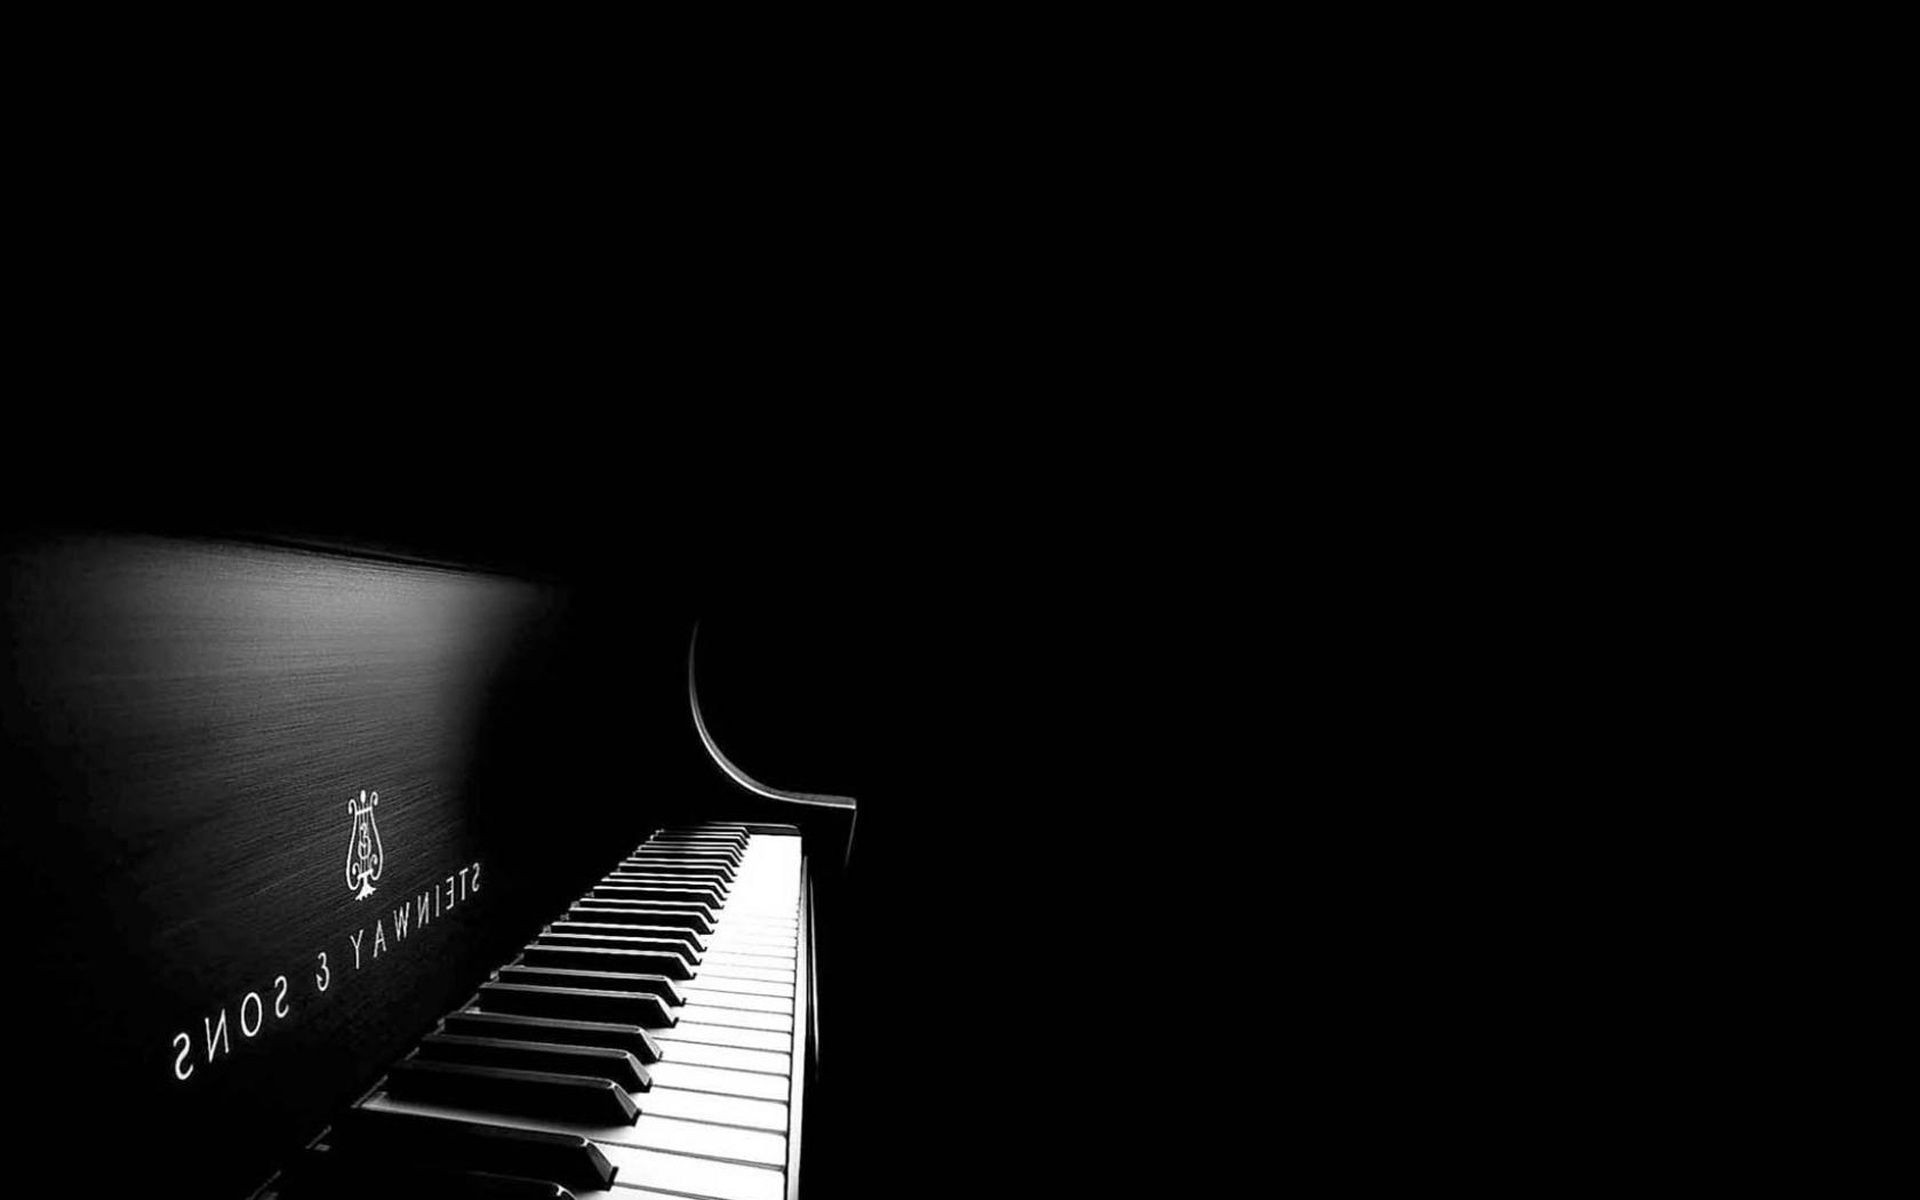 musical instruments piano dark jazz ebony instrument music ivory monochrome art concert sound classic studio artistic pianist synthesizer harmony abstract acoustic